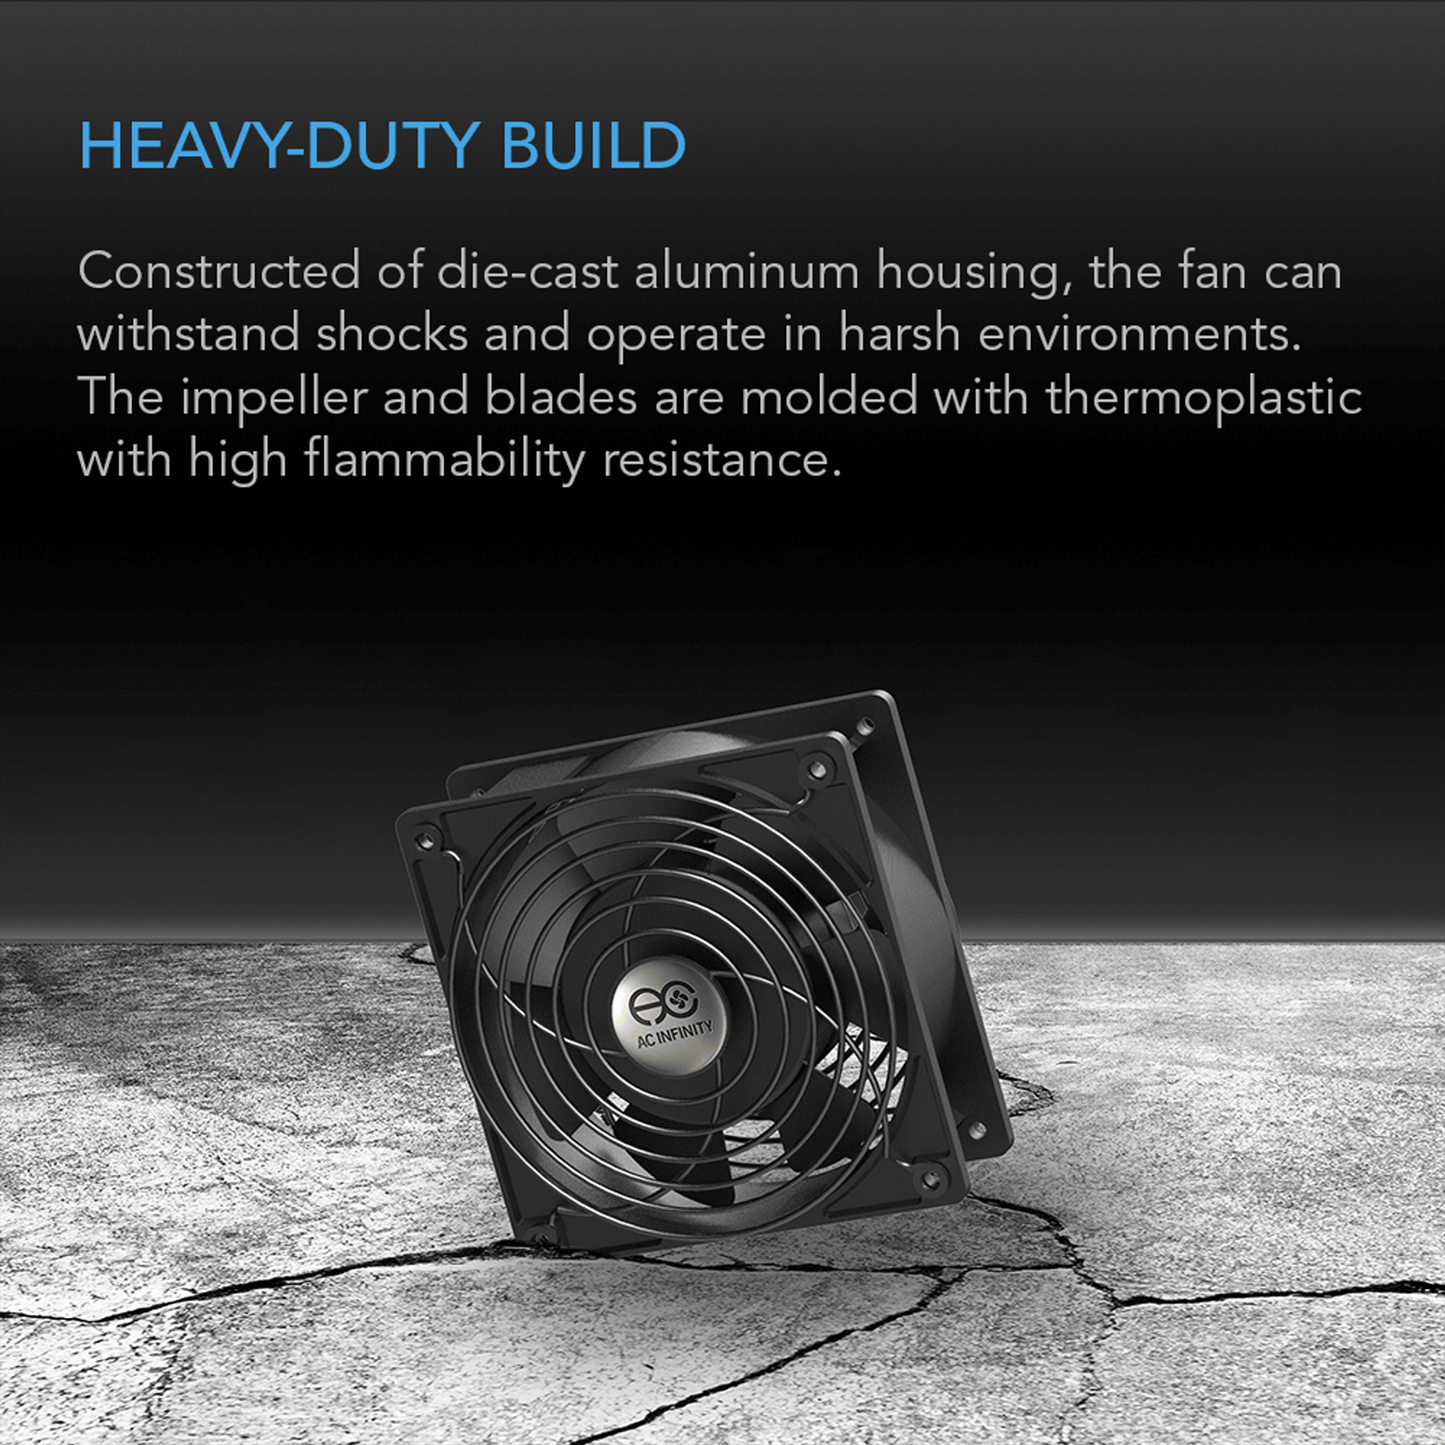 AC Infinity AXIAL 8038, Muffin 120V AC Cooling Fan, 80mm x 80mm x 38mm, Low Speed LS8038A-X Climate Control 854759004273